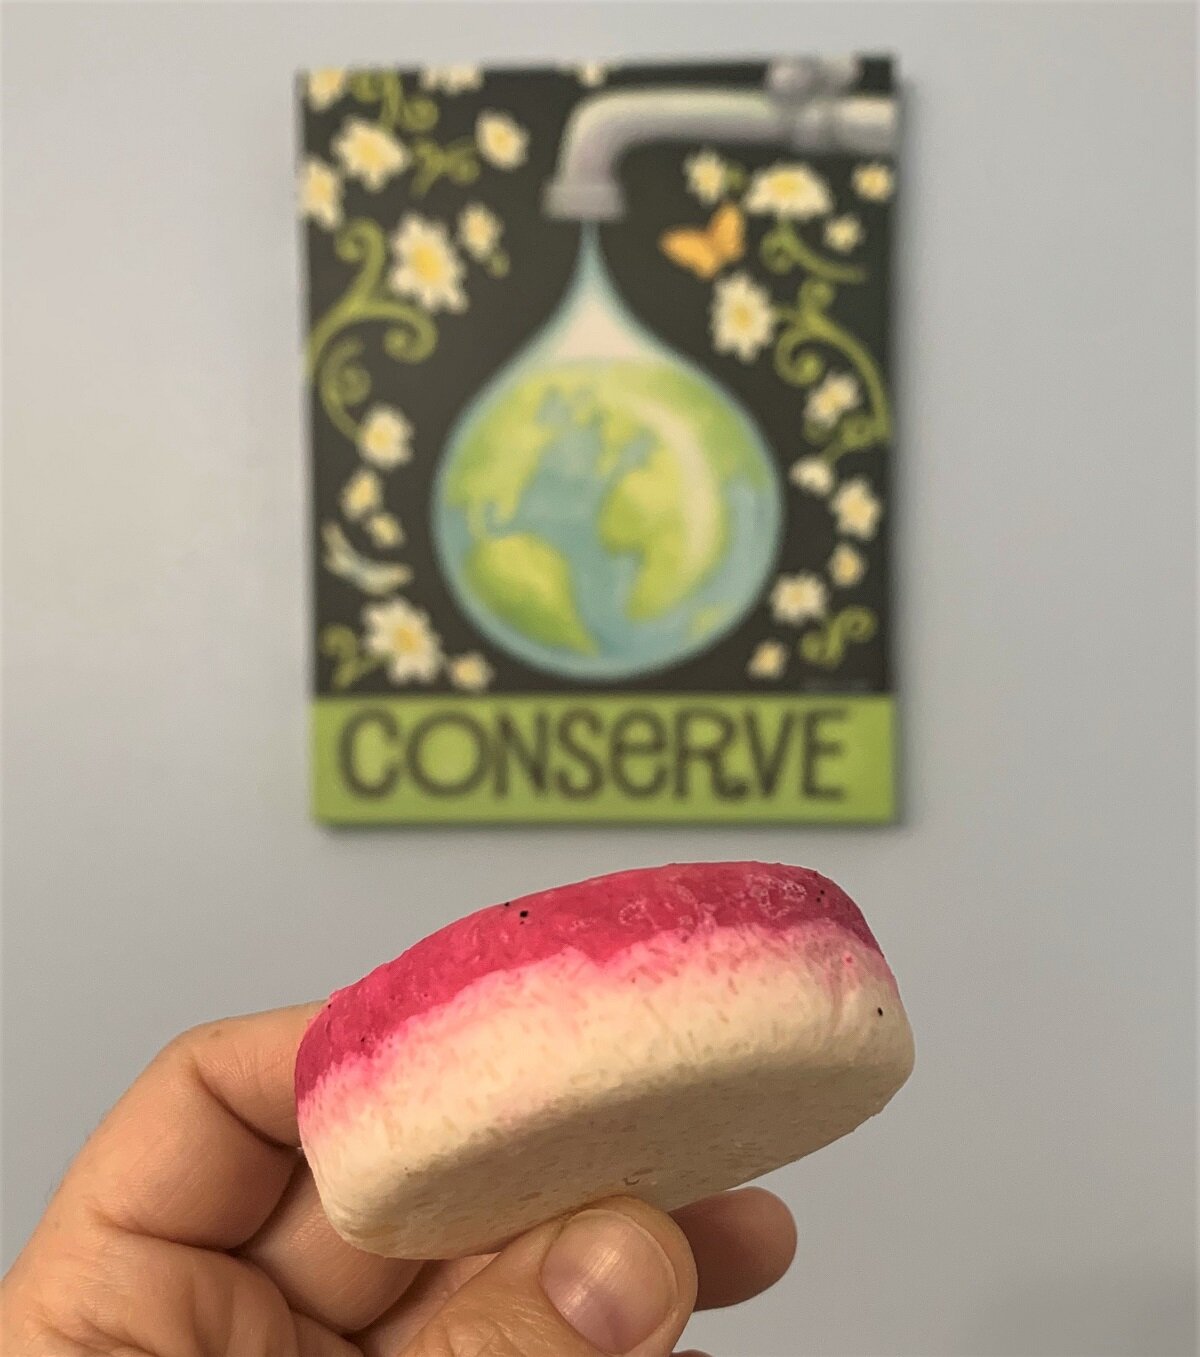 shampoo bar from Lush with artwork in the background that says Conserve